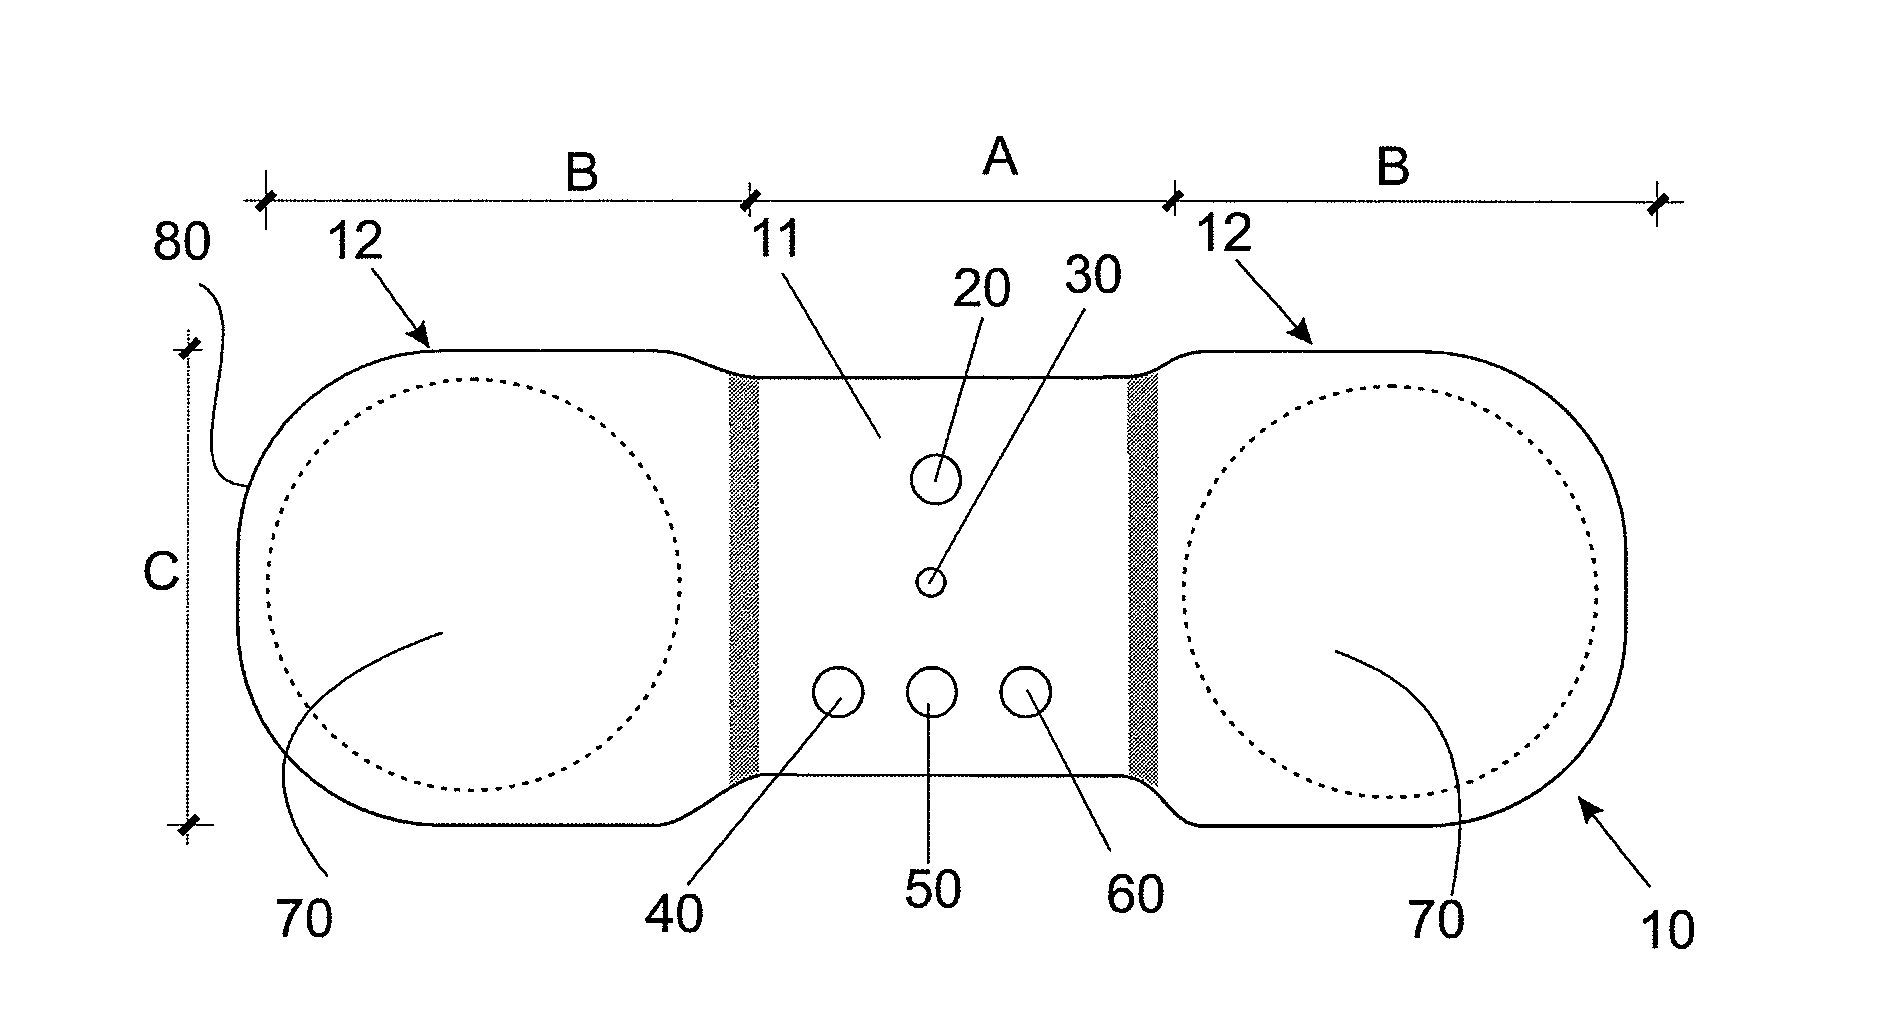 Assembly arrangement for bandage holding a transcutaneous electrical nerve stimulation device